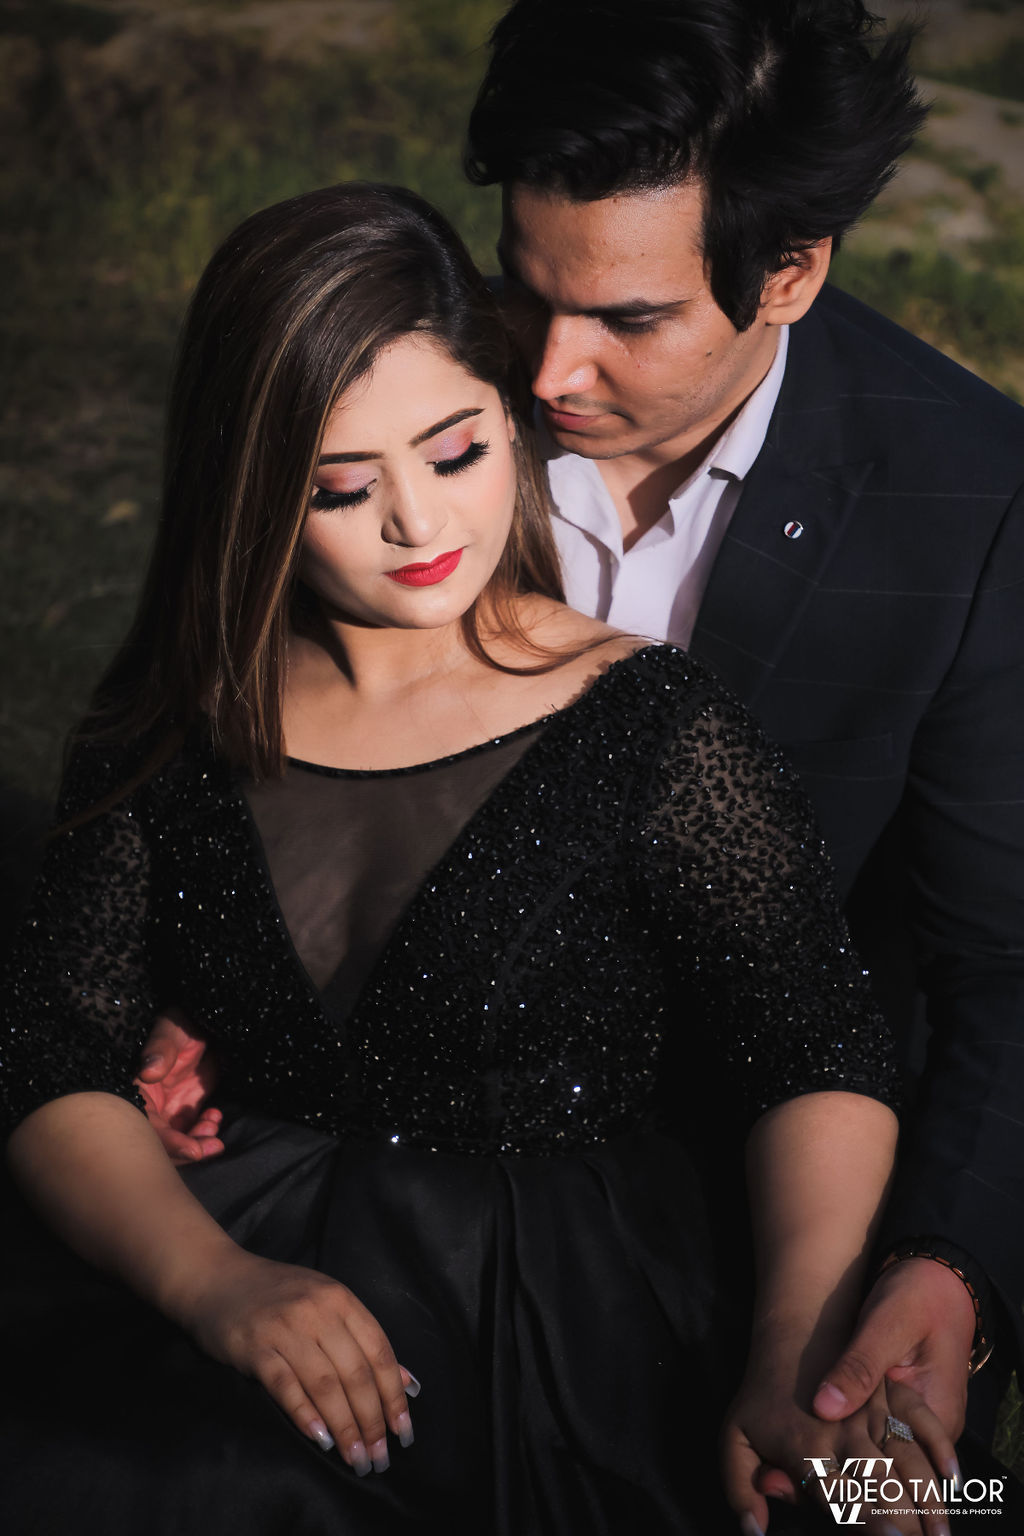 Prewedding Shoot Dresses From This Quirky Gurgaon Shoot Will Inspire You! |  Wedding photoshoot props, Pre wedding photoshoot outdoor, Pre wedding  photoshoot props